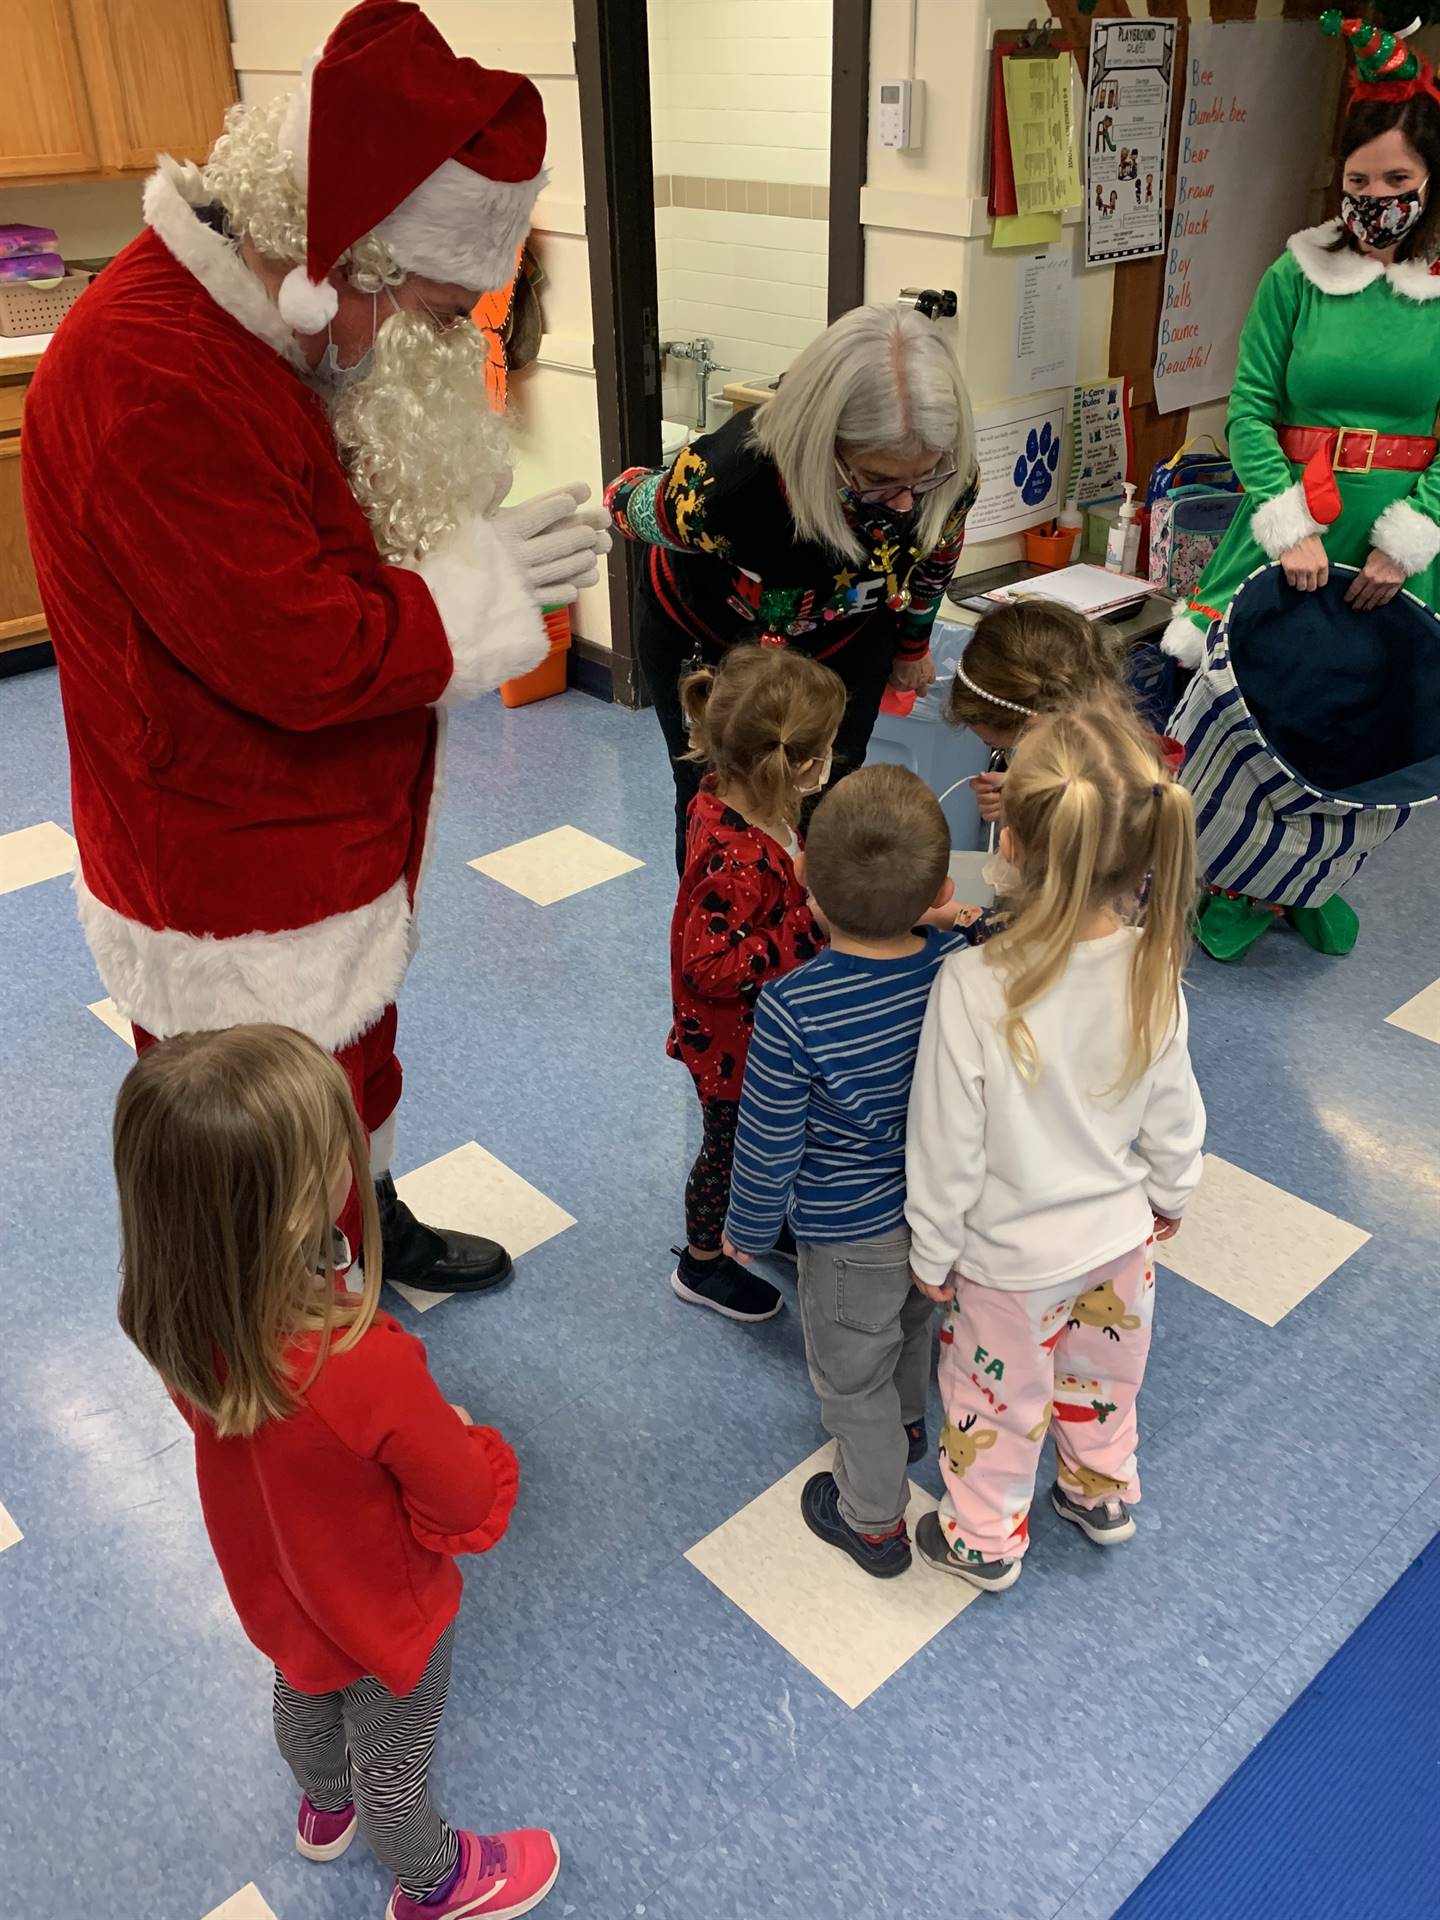 Santa is talking with 4 small children while principal listens to children.